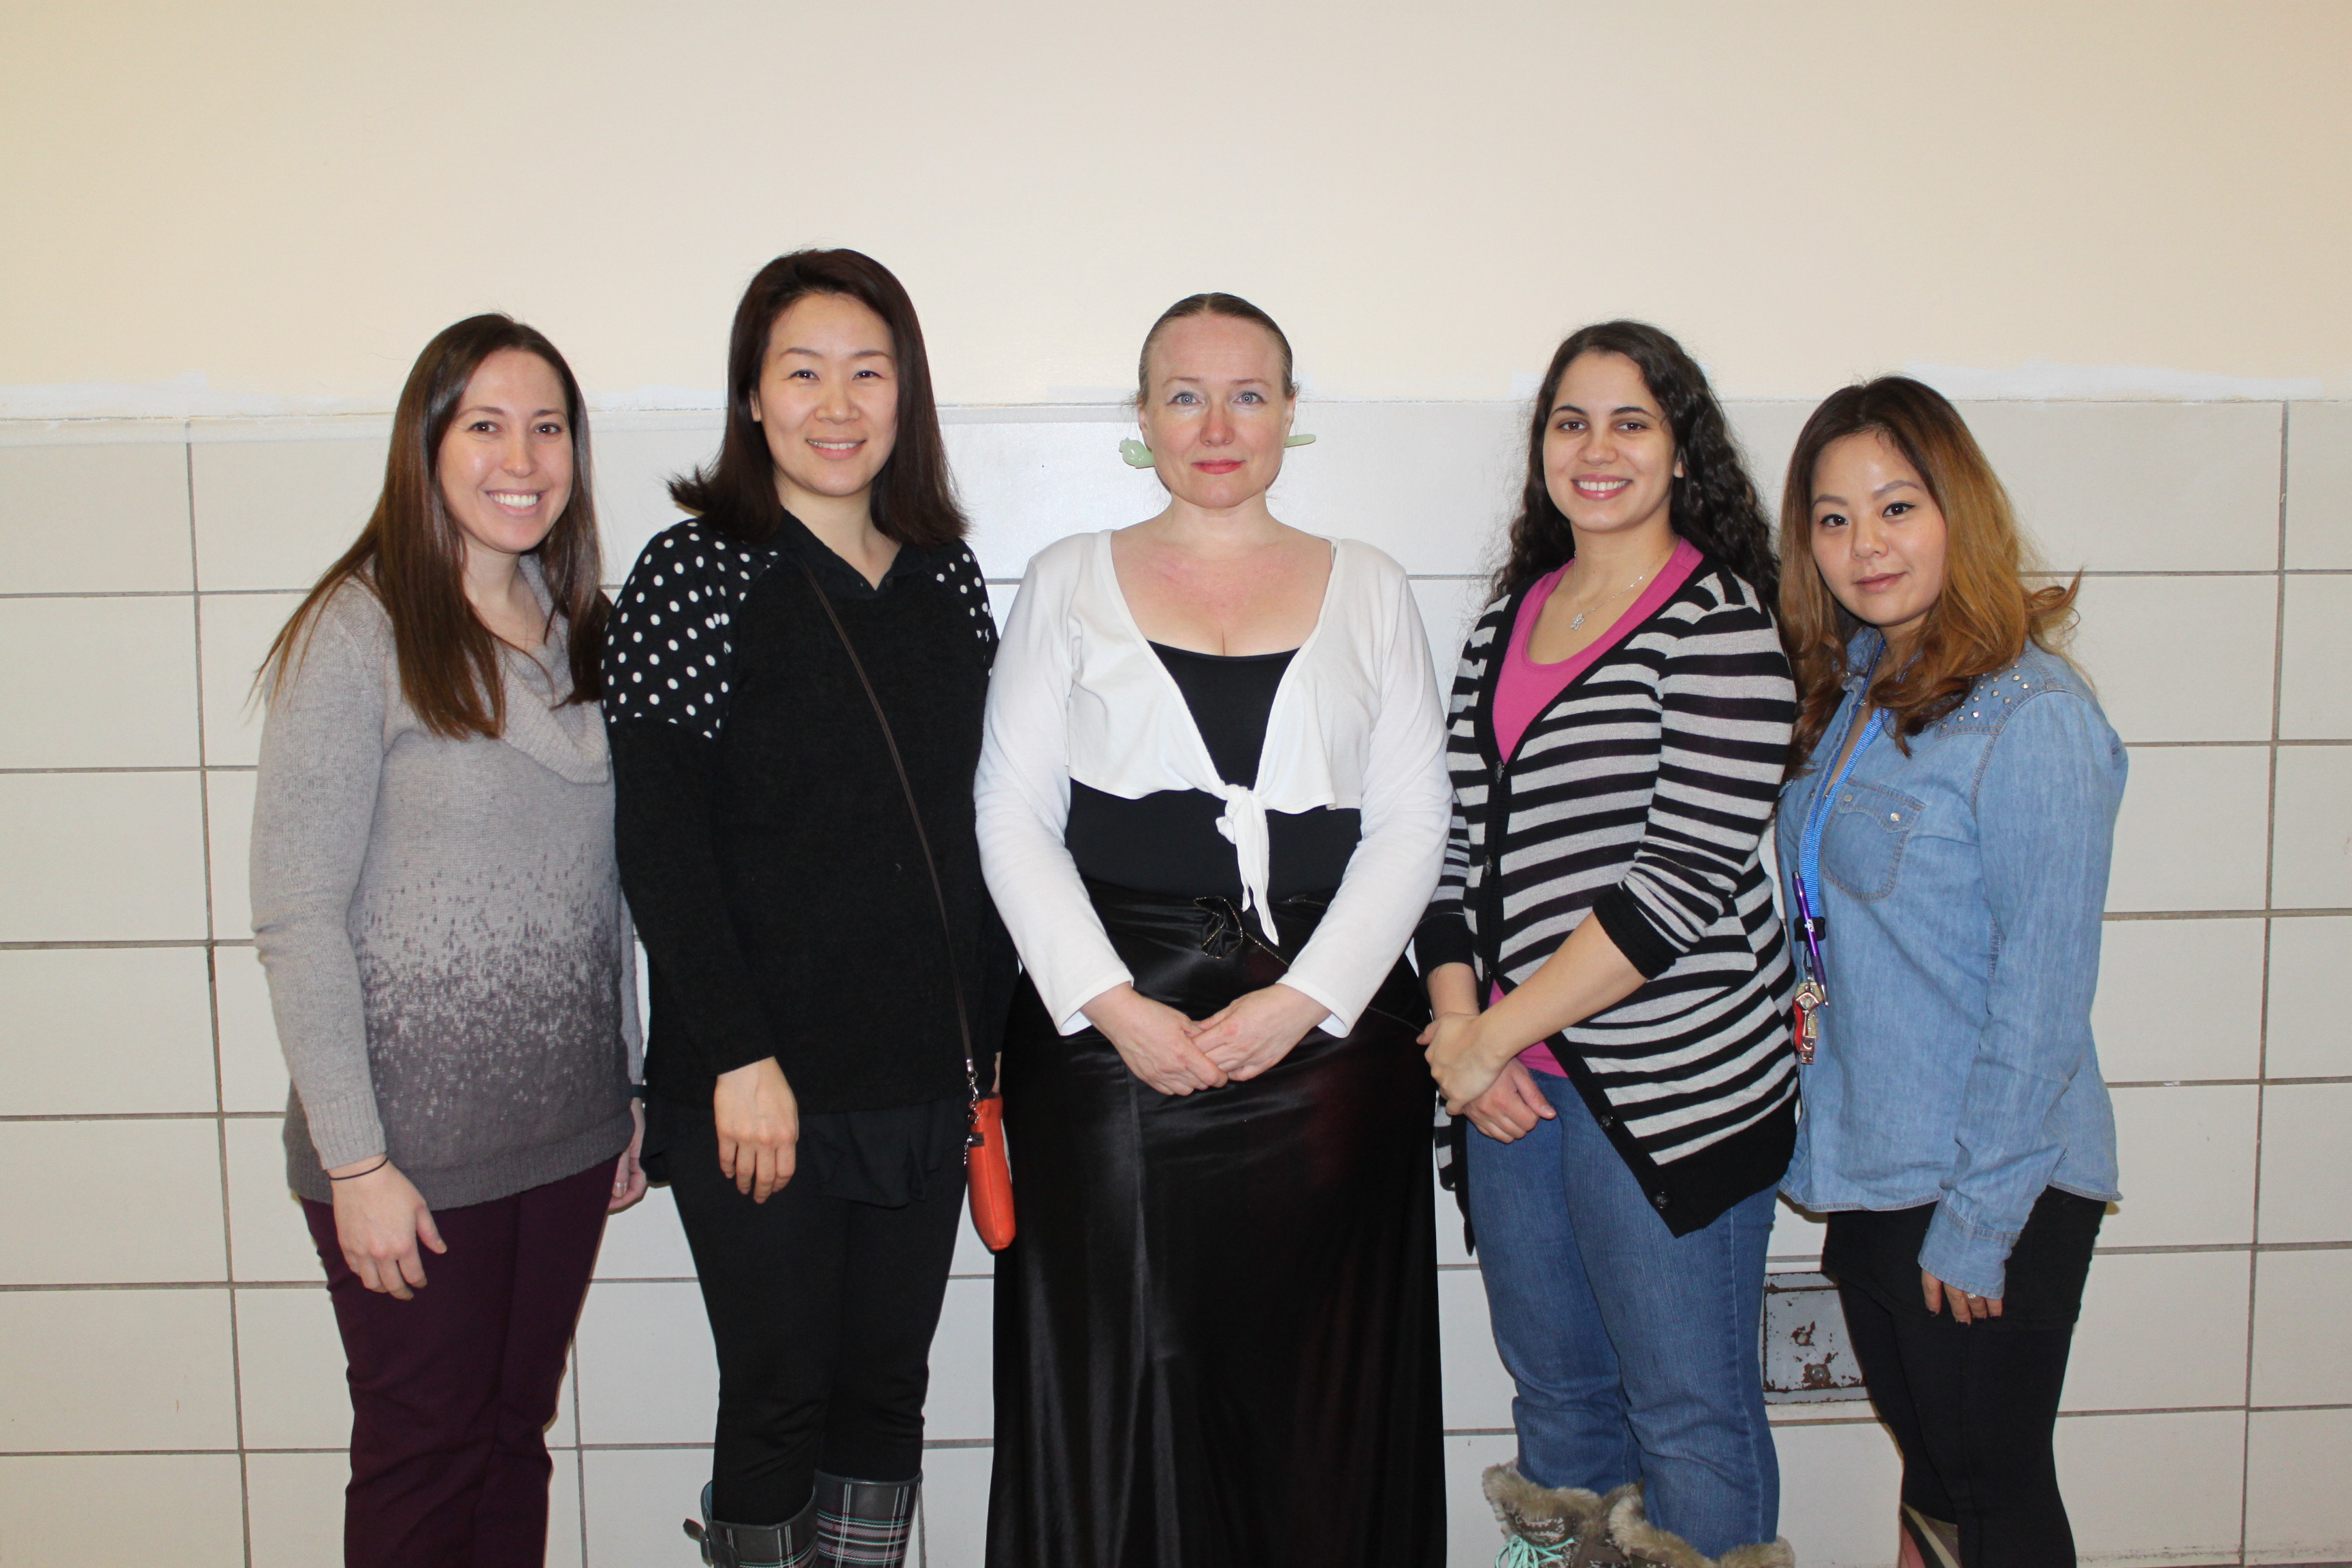 From left to right: Ms. Silverman, Ms. Kim, Ms. Karen, Ms. Luz, and Ms. Choi